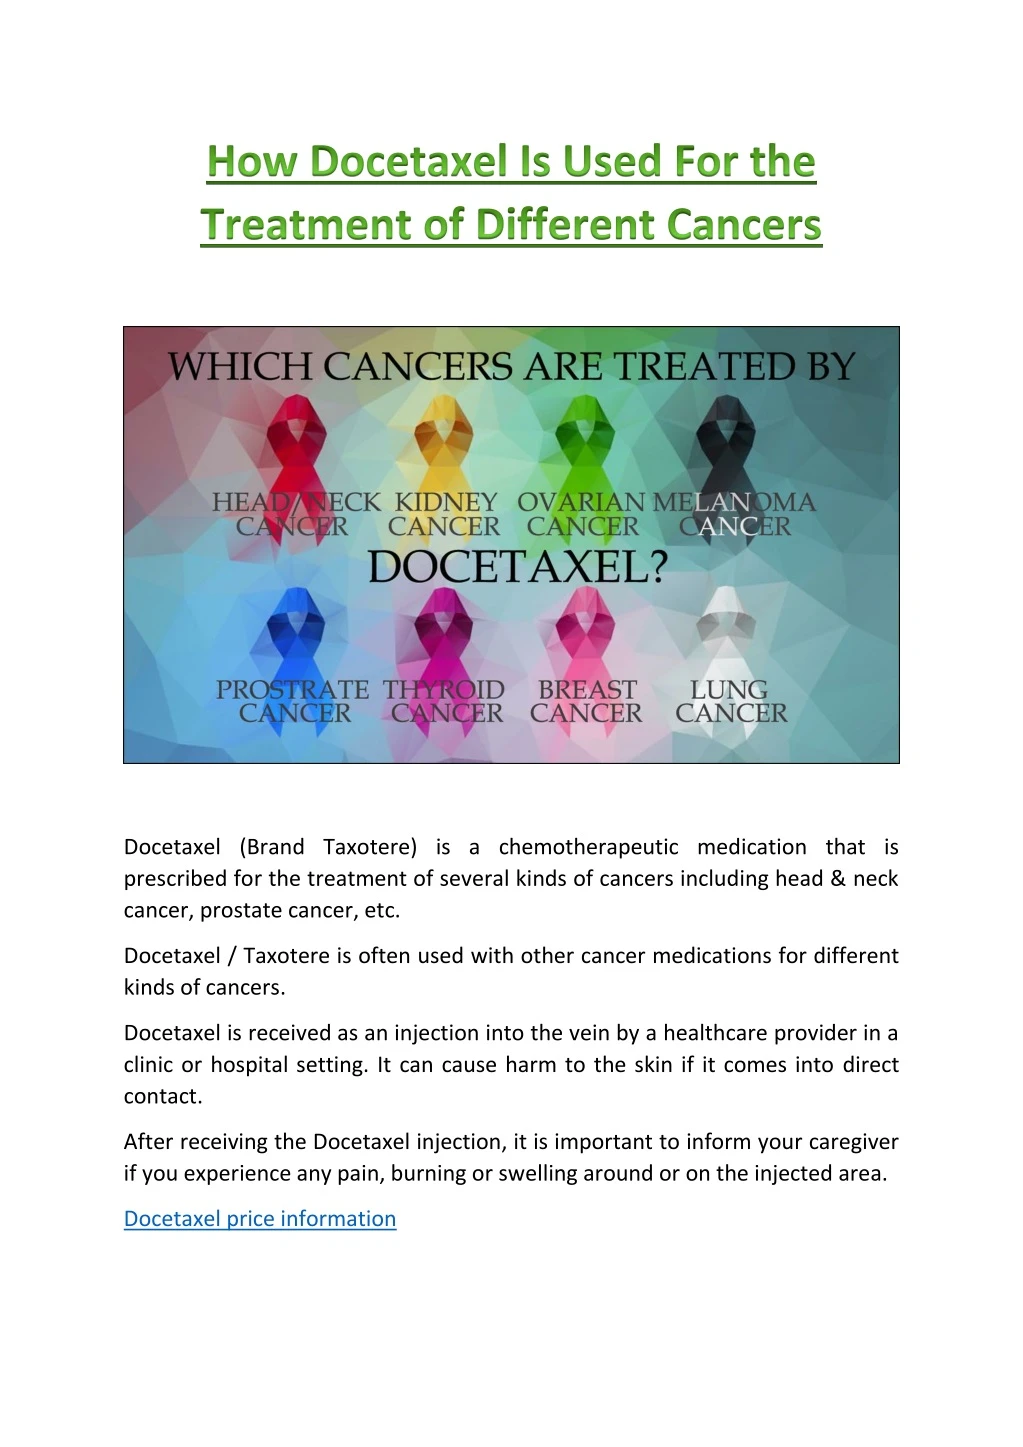 docetaxel brand taxotere is a chemotherapeutic